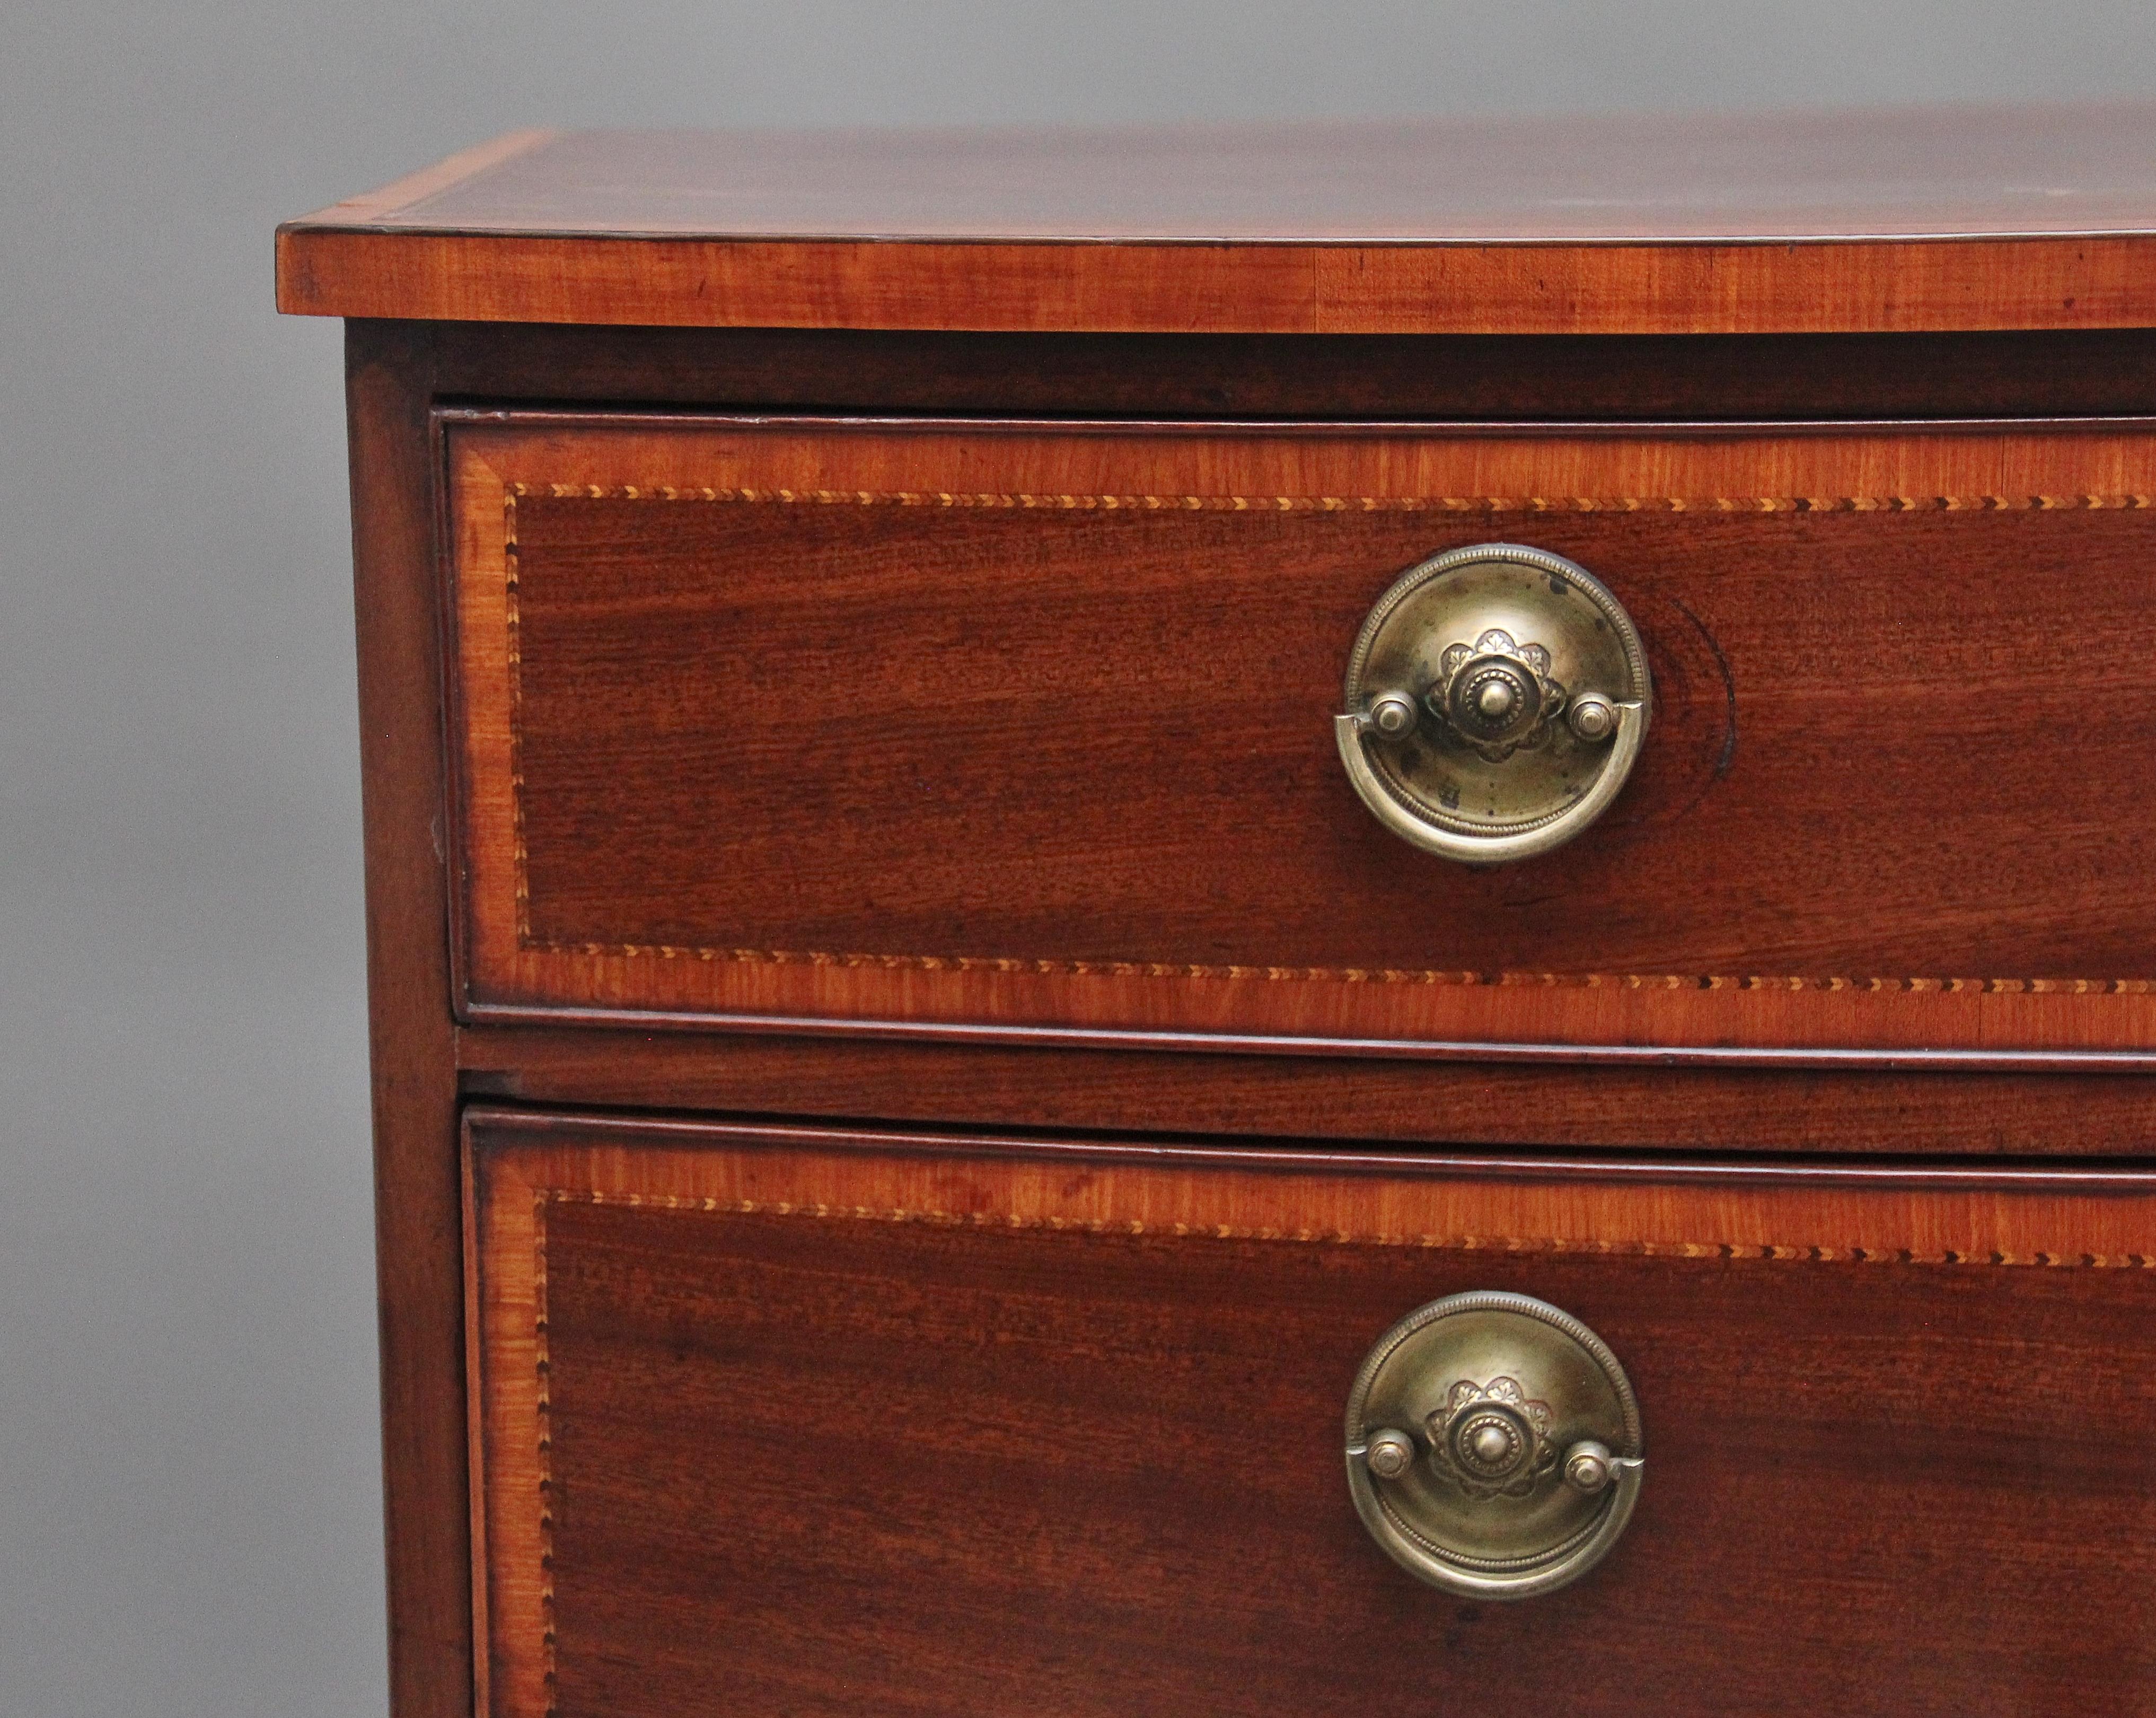 A highly decorative 18th Century mahogany bowfront chest of drawers, having a nice figured and crossbanded top above four graduated oak lined drawers with brass oval plate handles, the drawer fronts crossbanded and having decorative chequered inlay